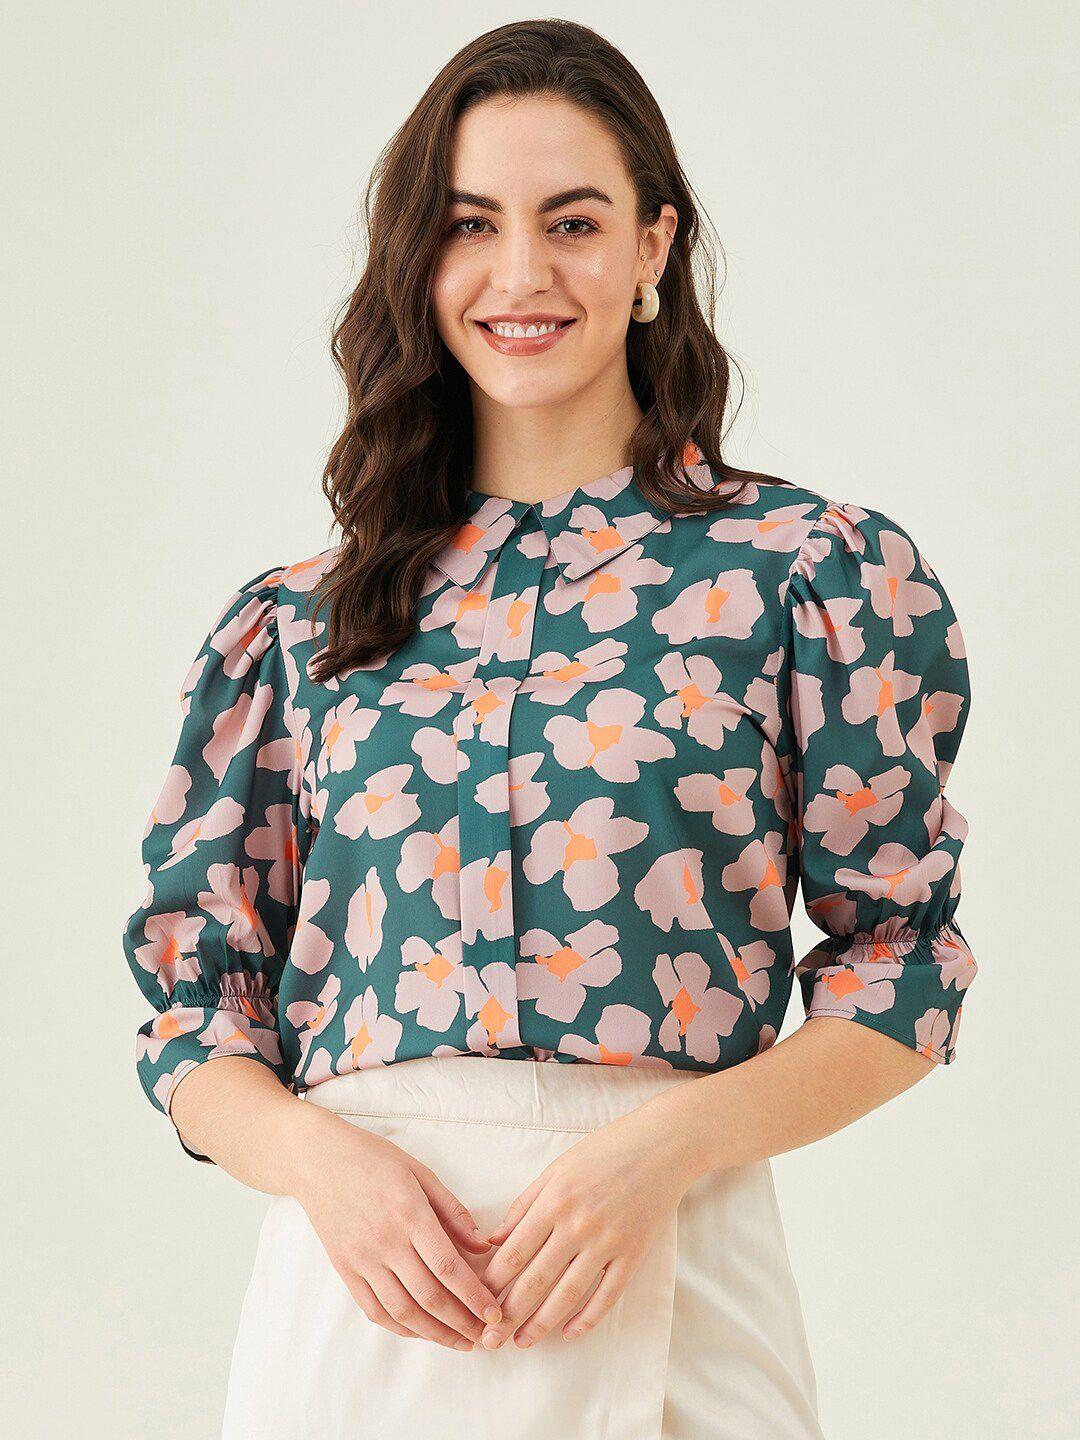 modeve-floral-printed-shirt-collar-puff-sleeves-shirt-style-top